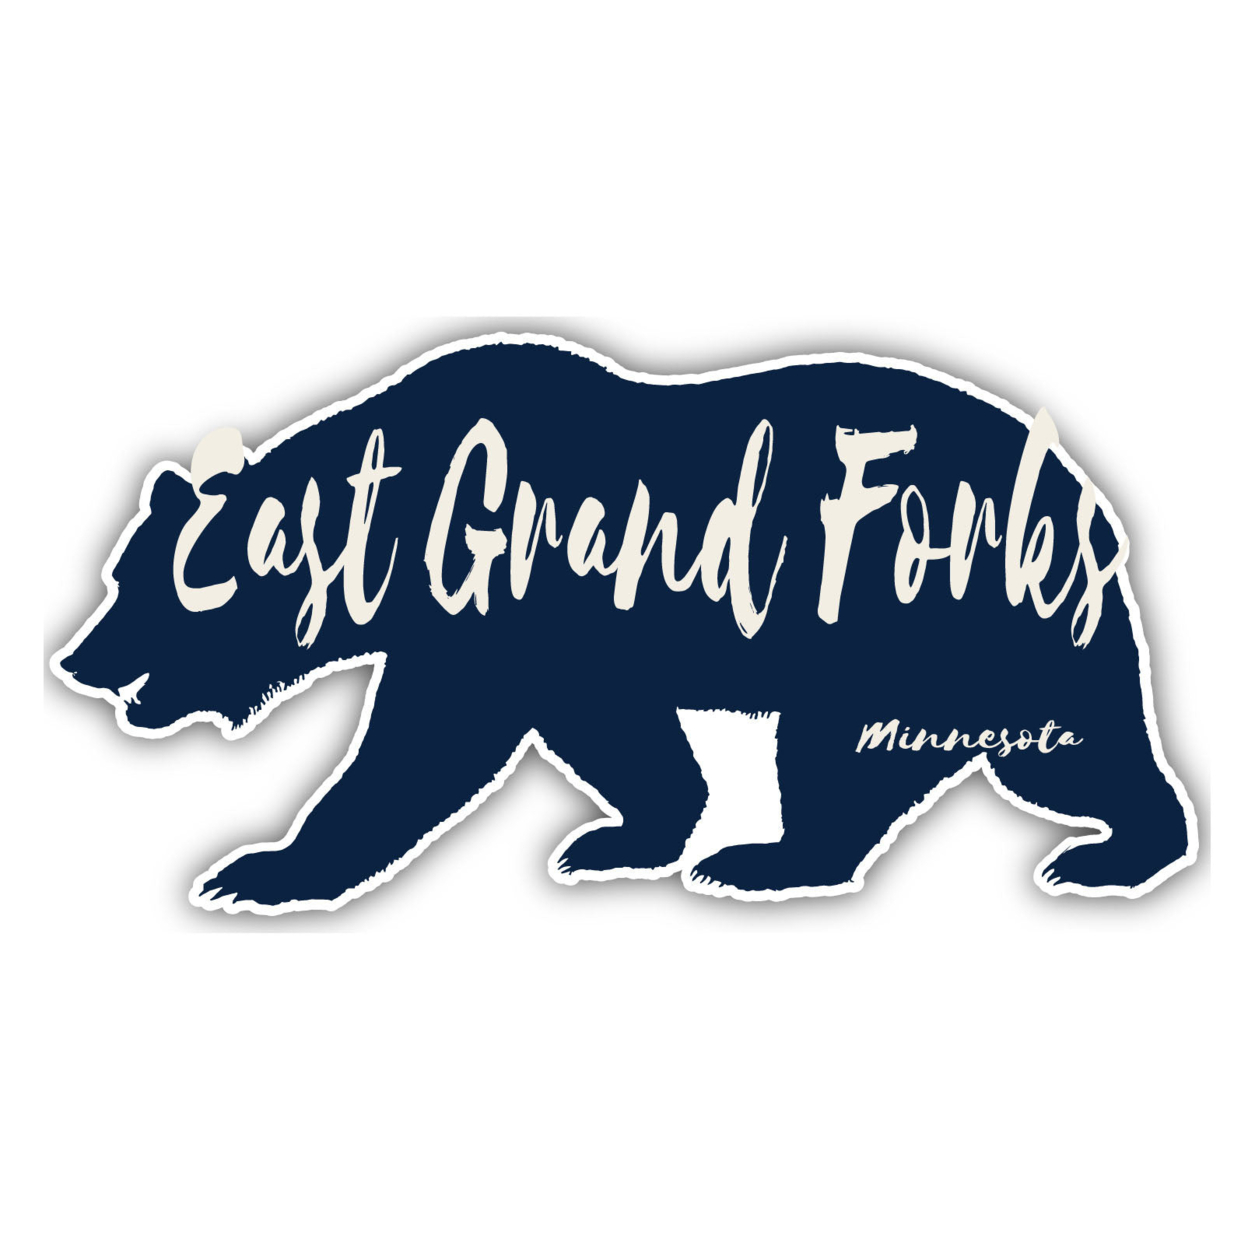 East Grand Forks Minnesota Souvenir Decorative Stickers (Choose Theme And Size) - 4-Pack, 6-Inch, Camp Life